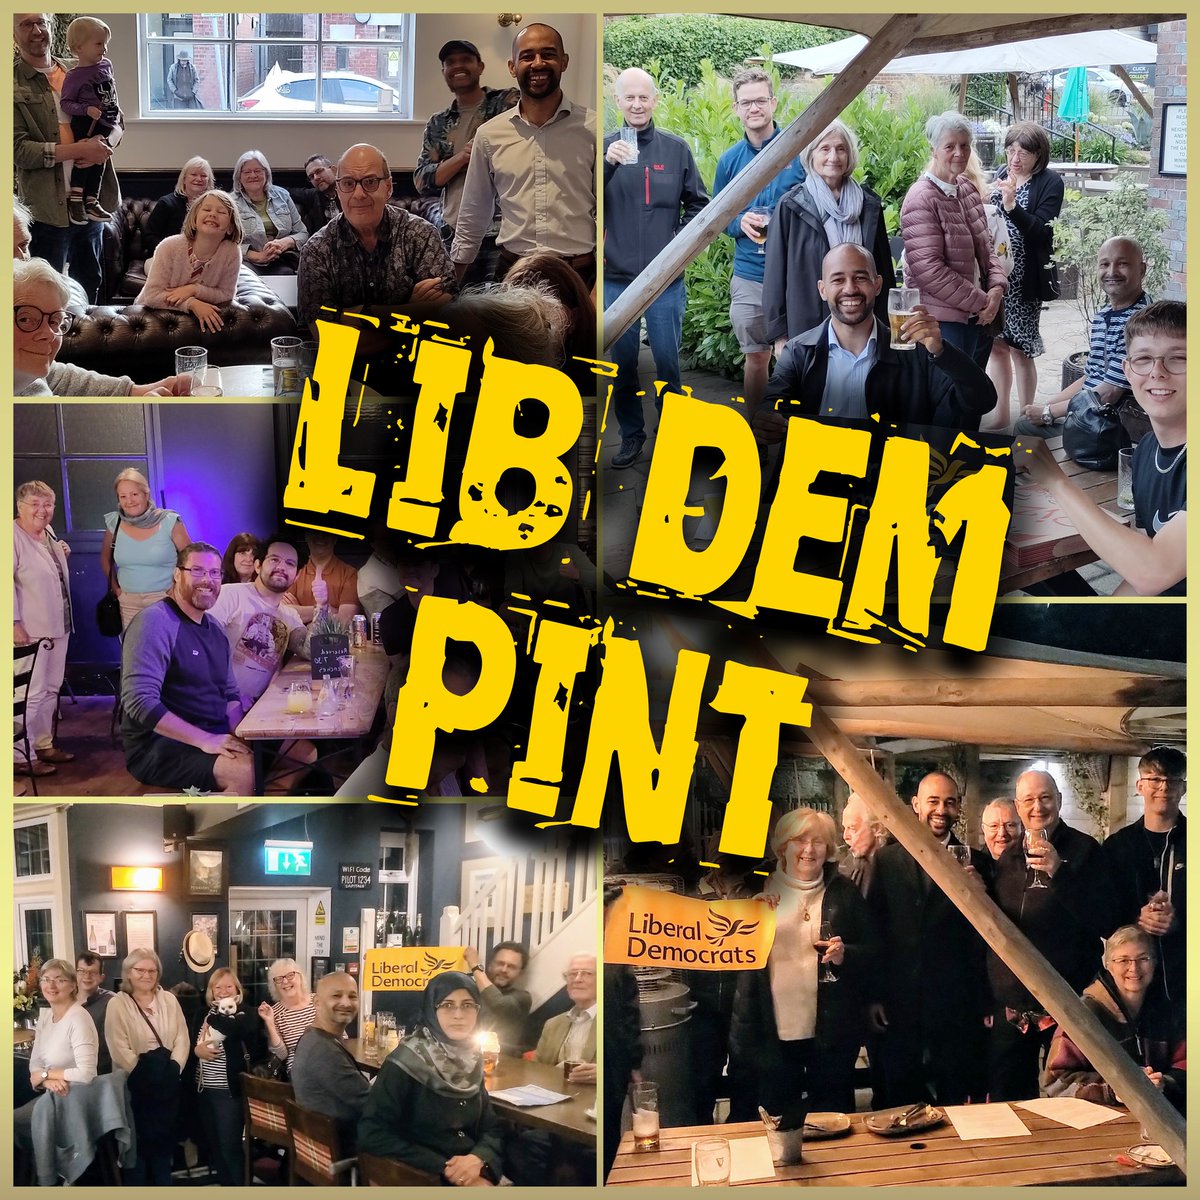 Join us for a #Eastbourne Spring time Lib Dem Pint in The Ship in Meads this evening (Thurs 14th) from 7:30pm. All welcome. Come get some politics